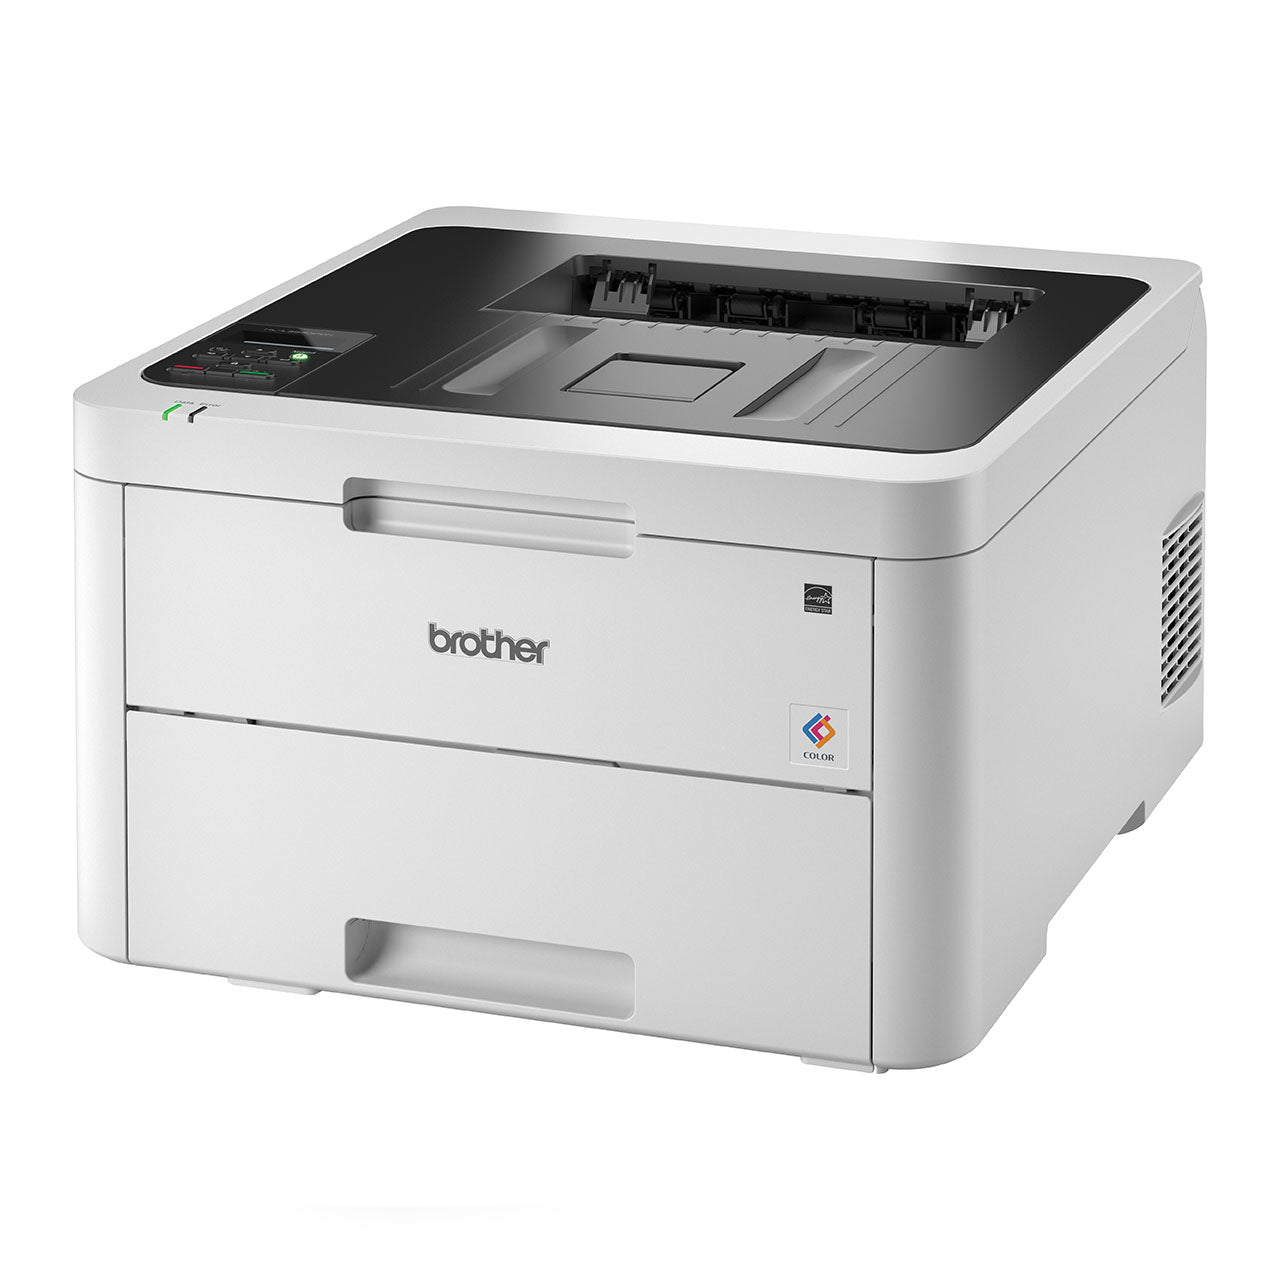 Brother Colour LED Printer with Network Connectivity Laser Printer